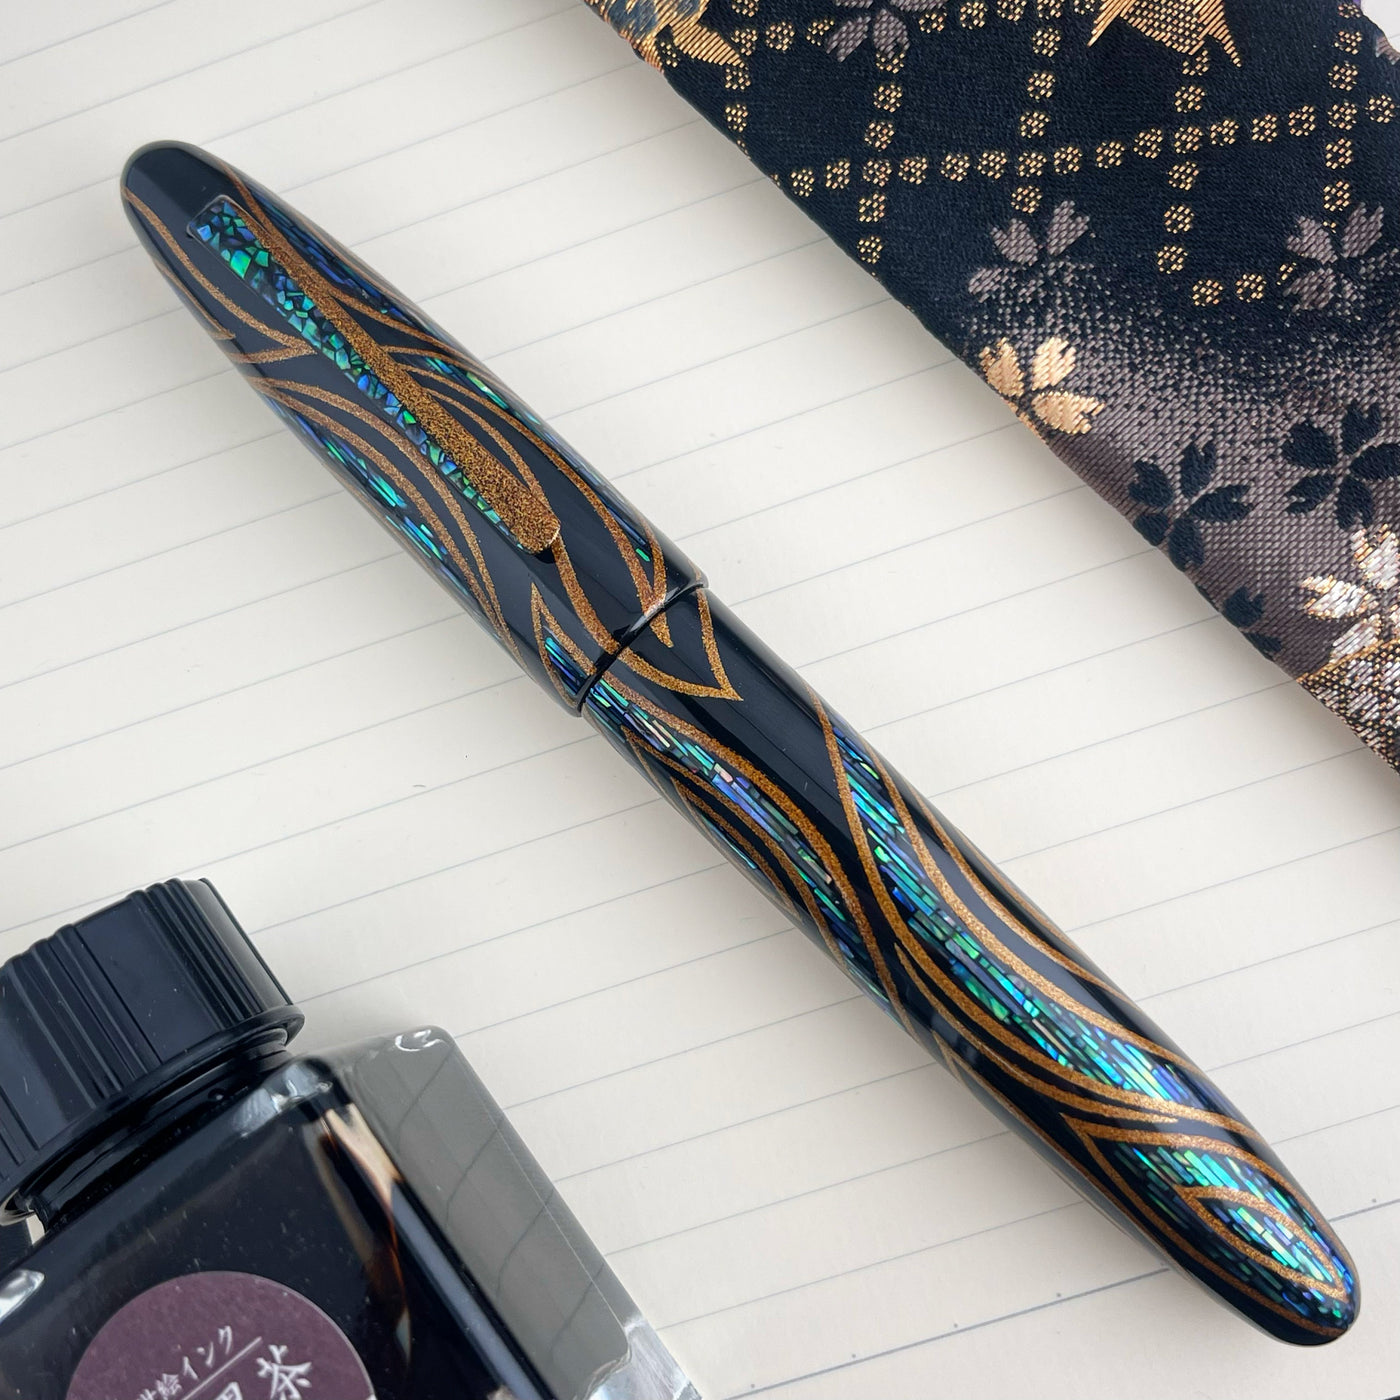 TACCIA Myabi Empress Fountain Pen - Fossils in the Sky - Sunset Peacock (Limited Edition)